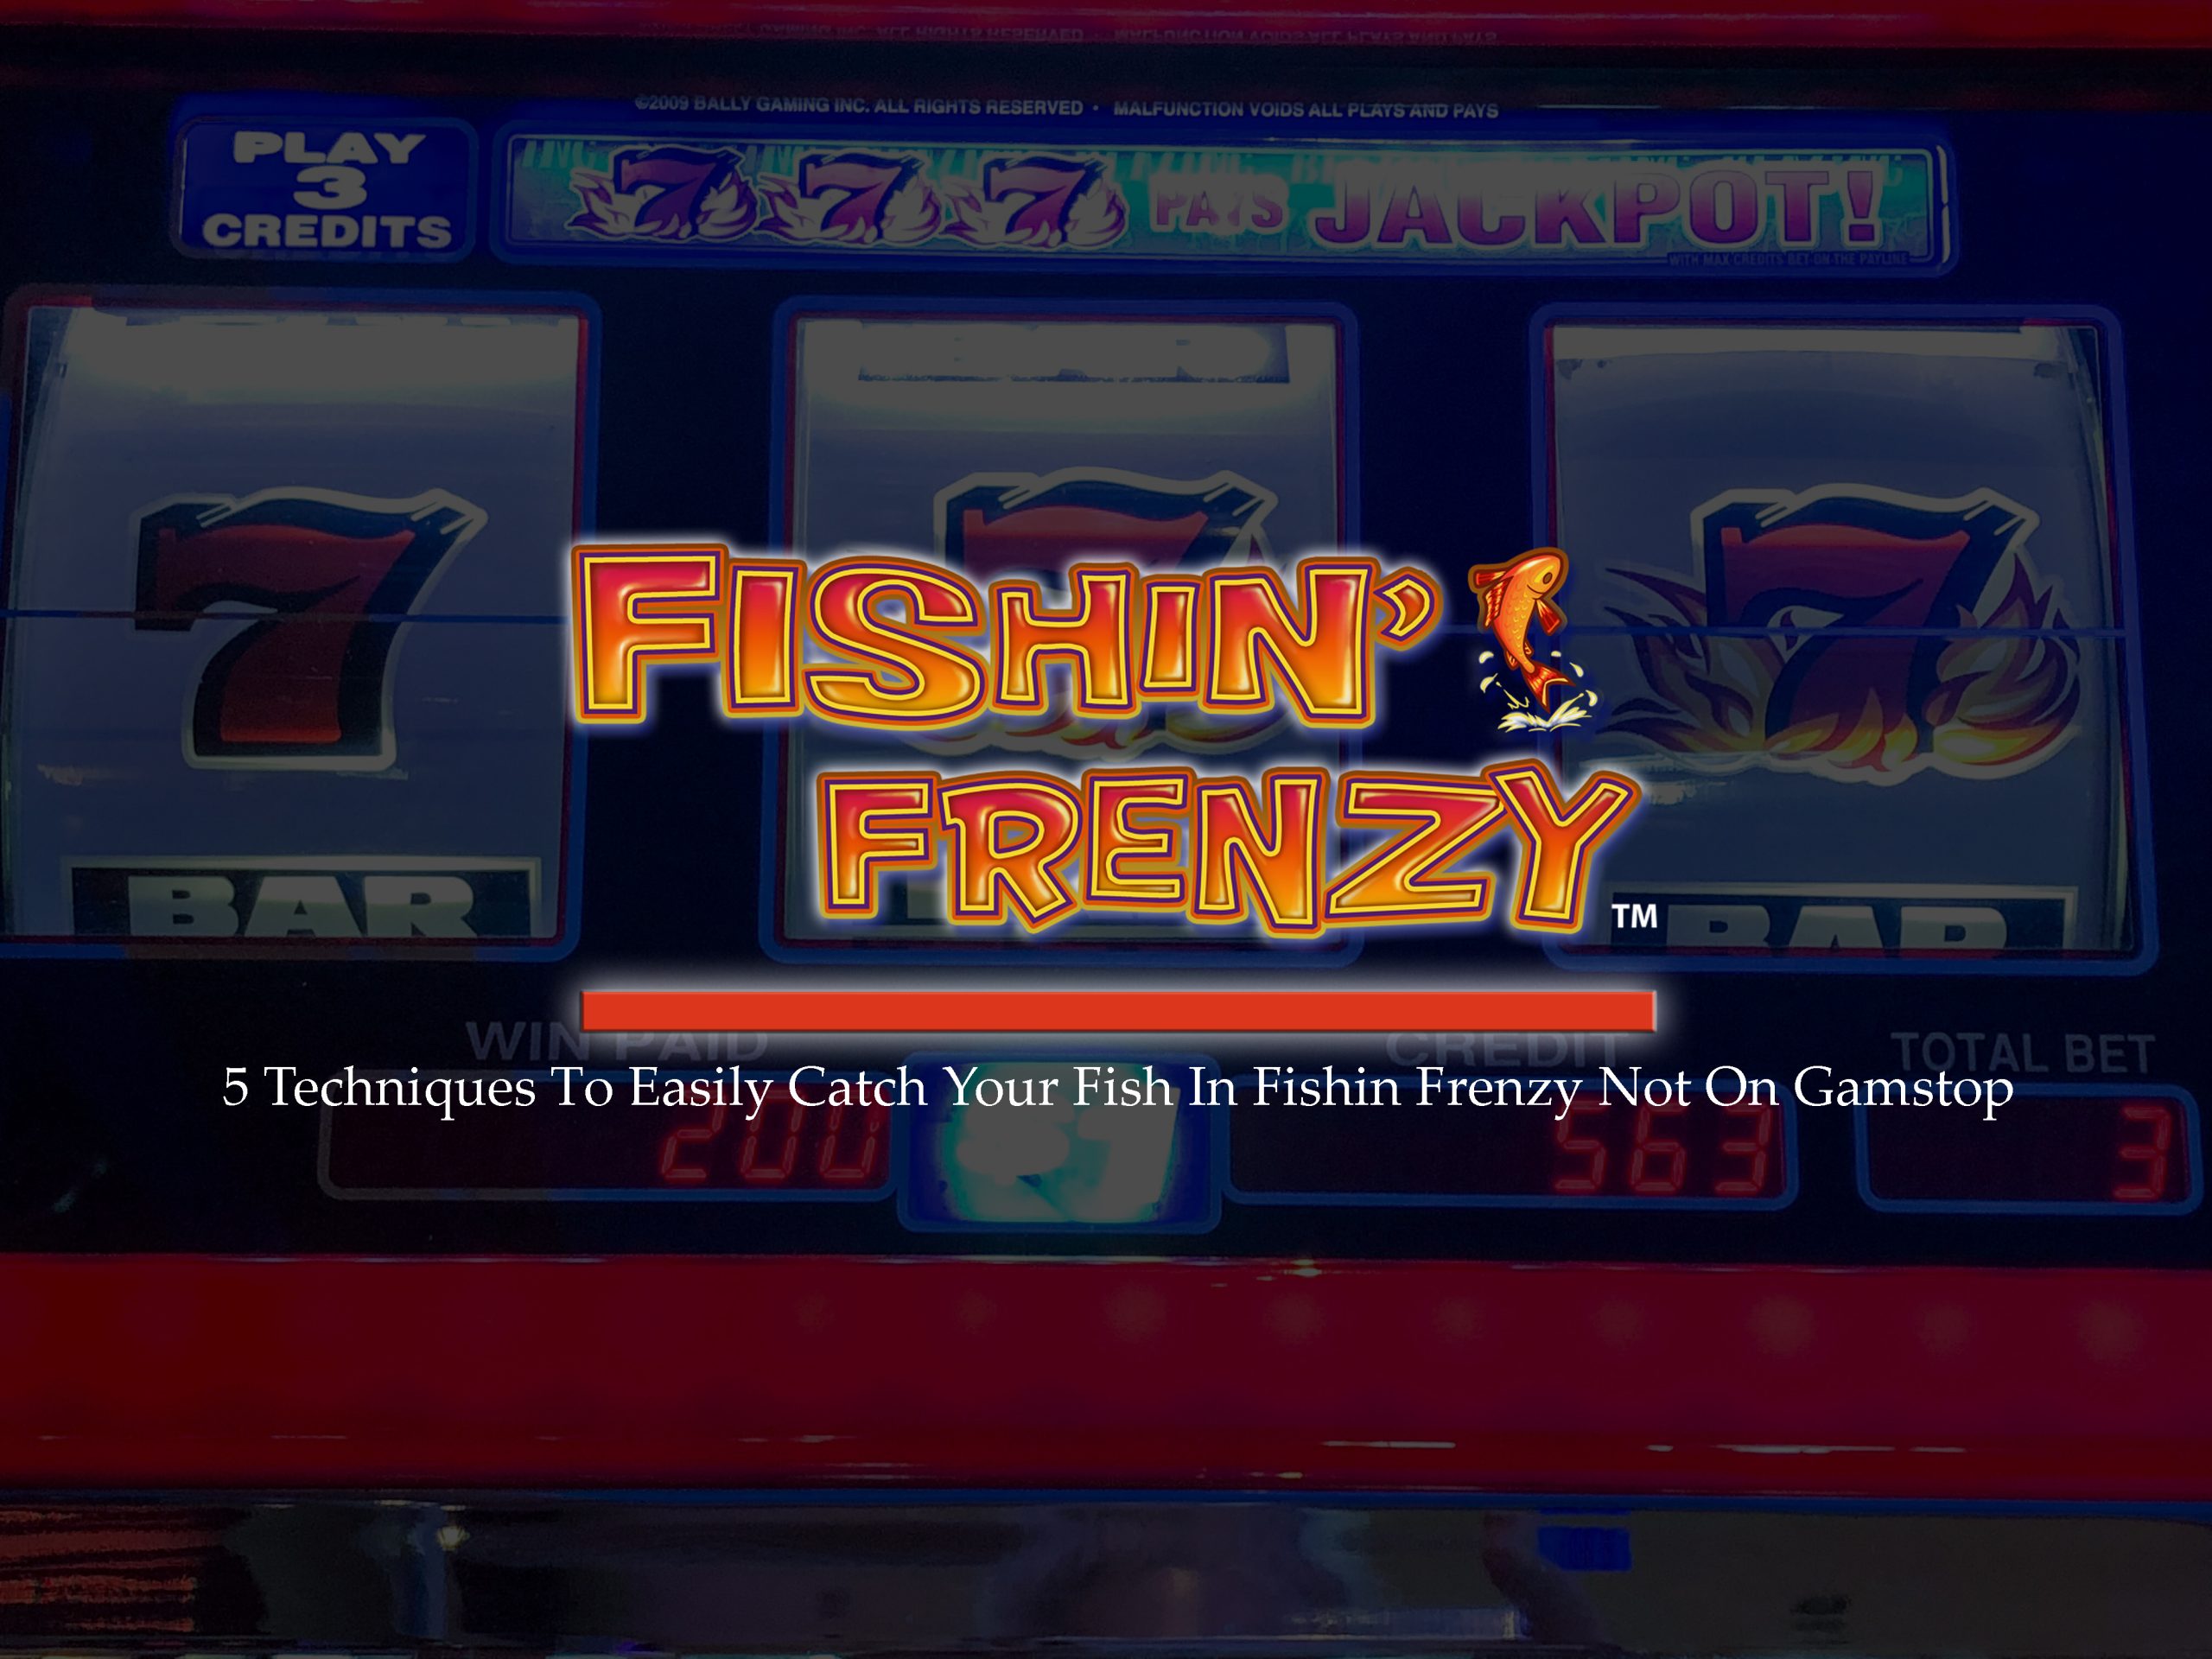 5 Techniques To Easily Catch Your Fish In Fishin Frenzy Not On Gamstop